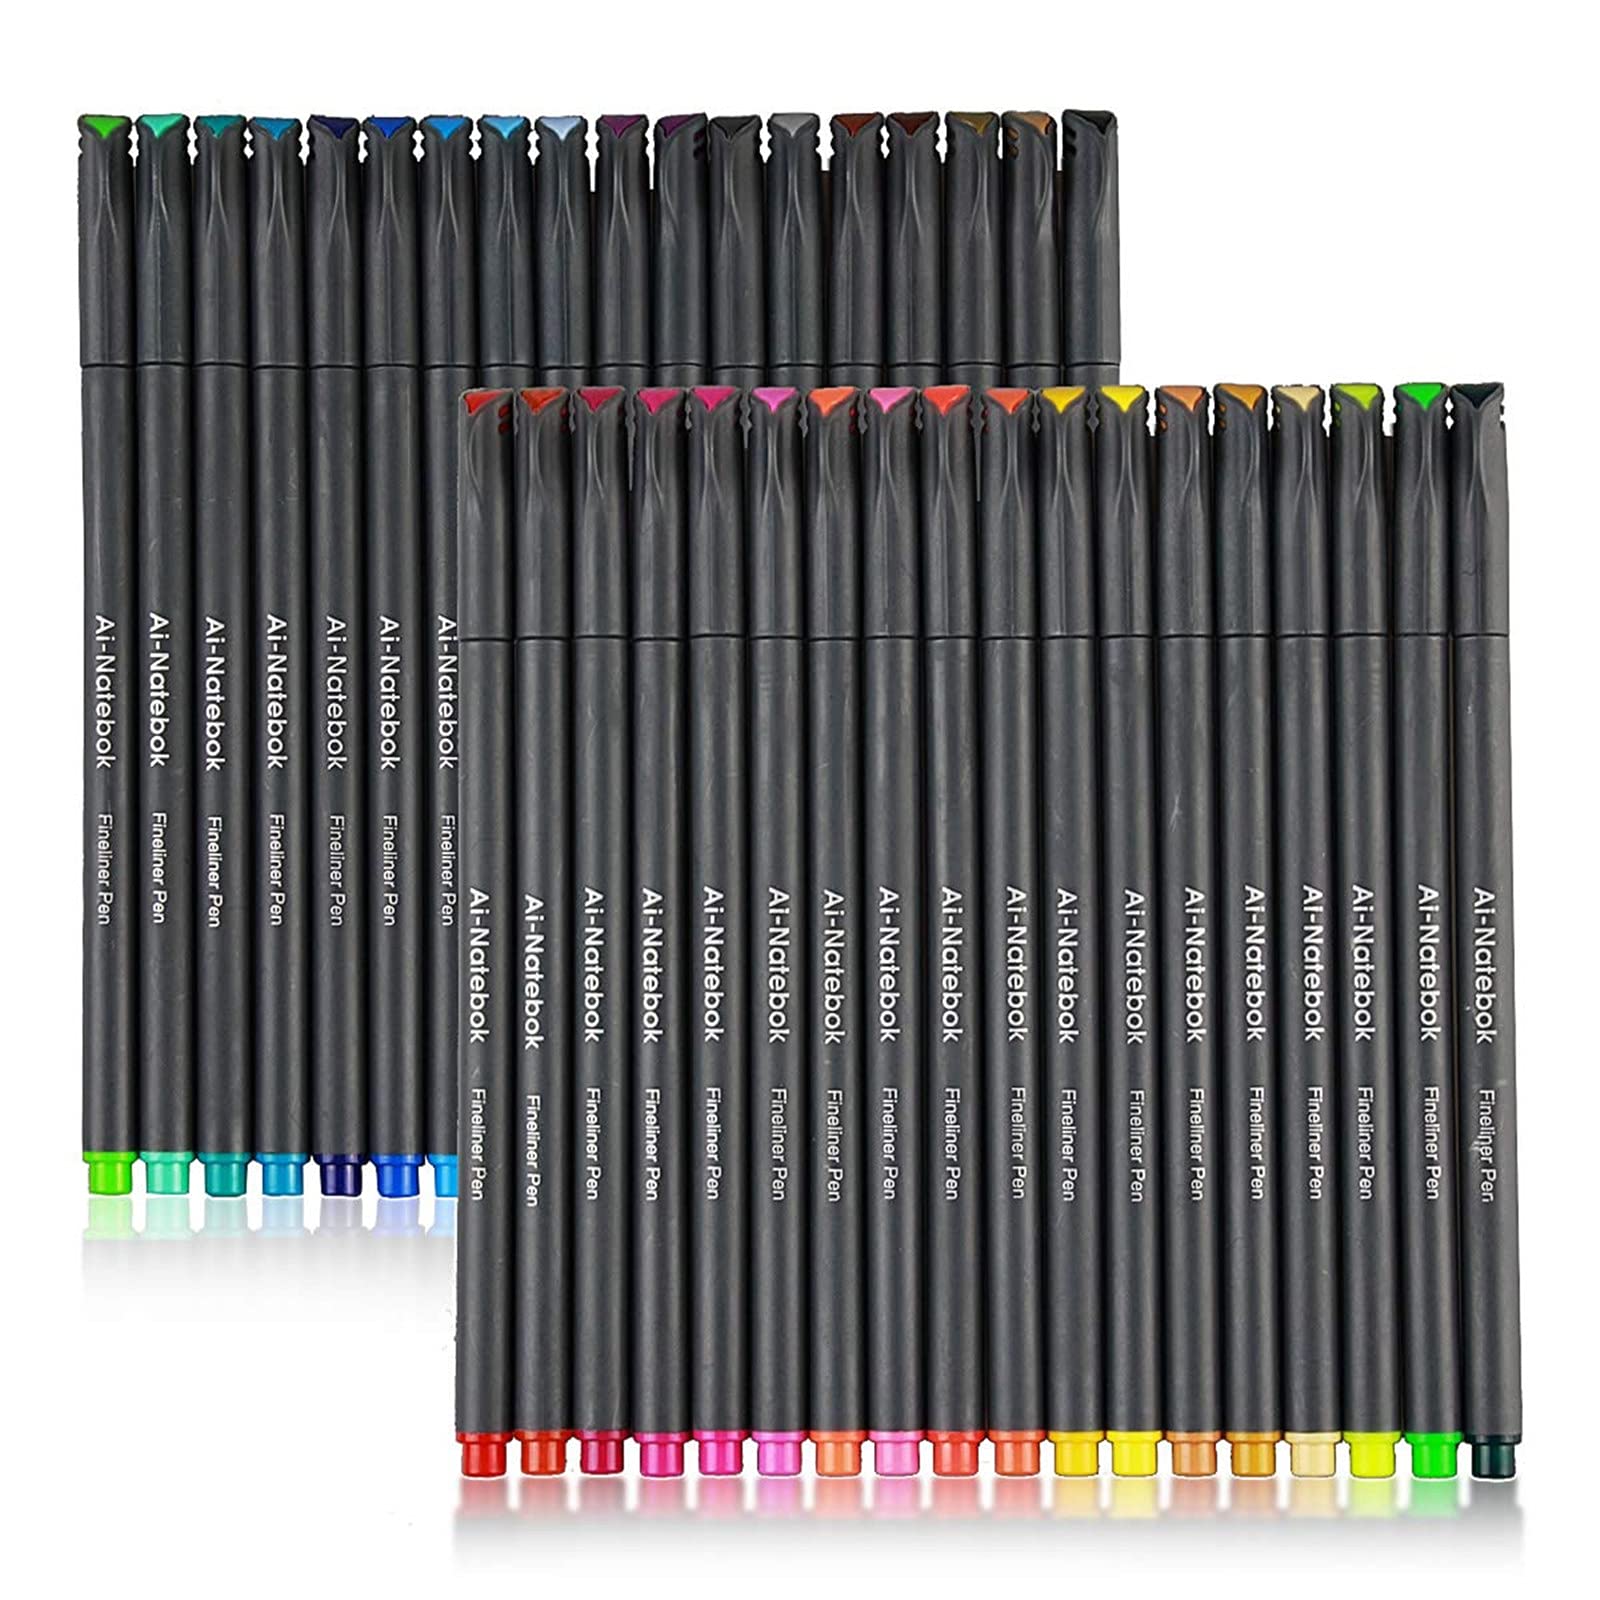 ai-natebok Dual Tip Pens,48 Colors Art Markers Set, Artist Fine and Brush  Tip Pens for Adult Coloring Books Bullet Journal Note Taking Writing